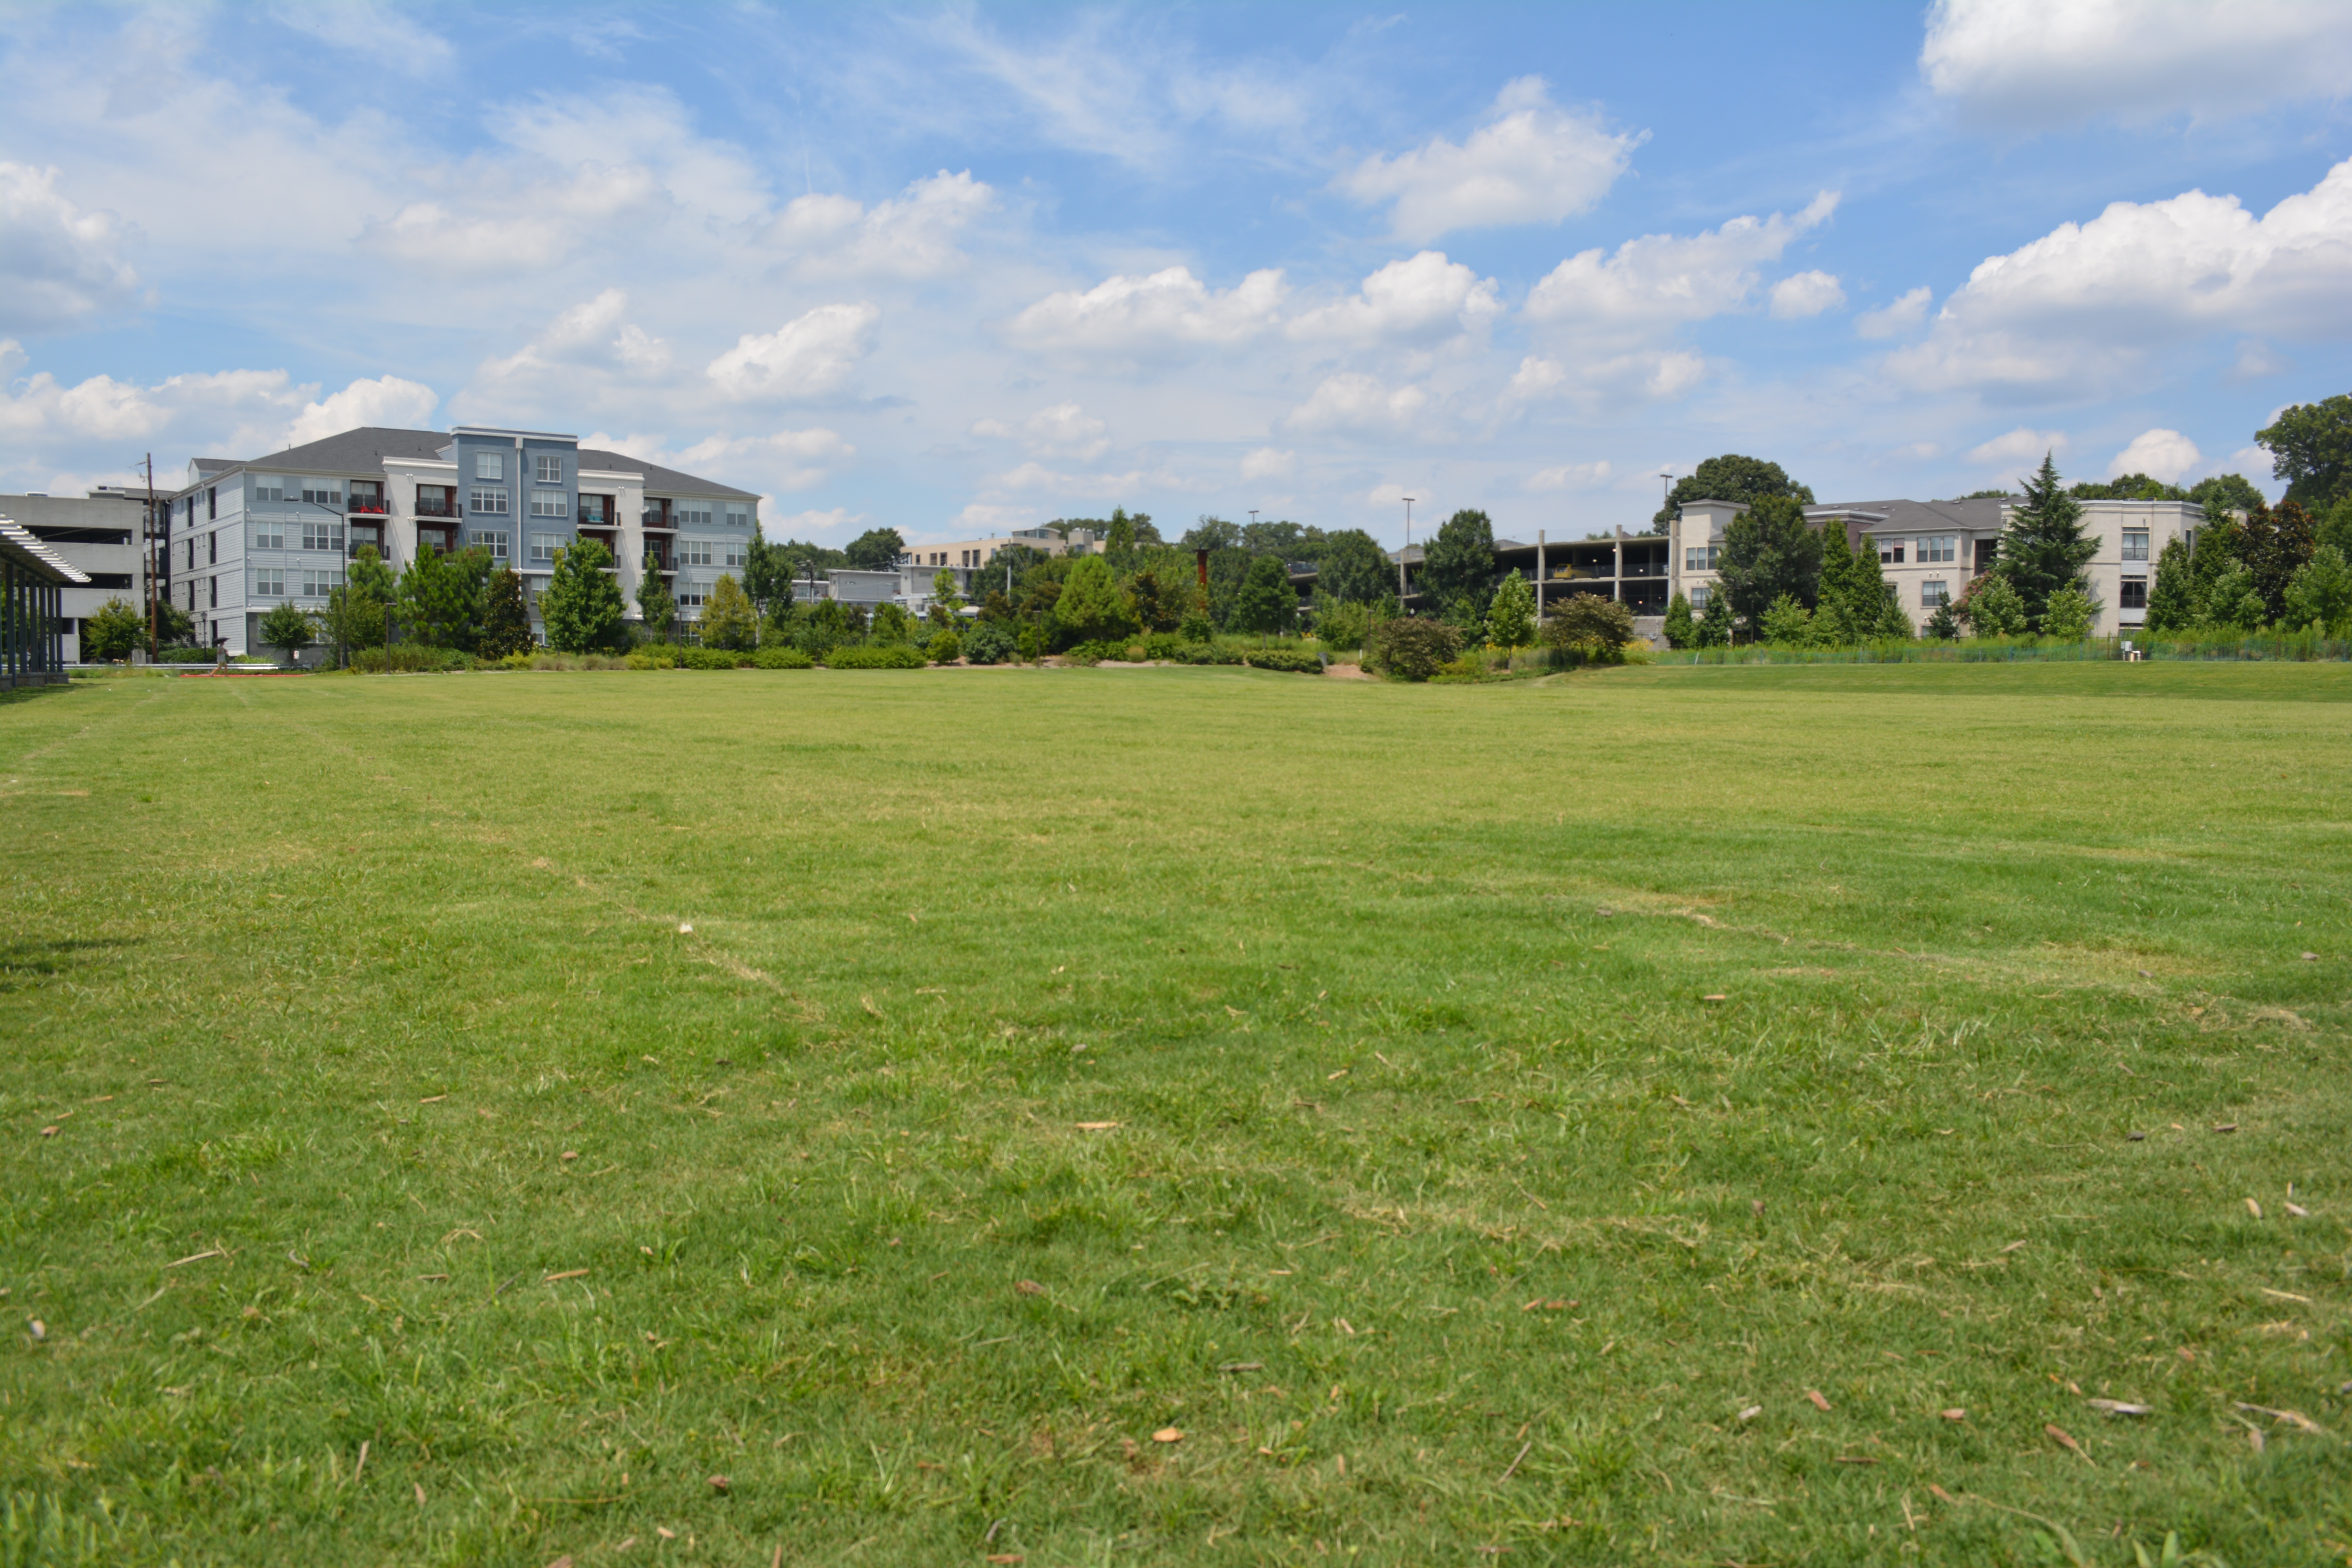 The multi-use athletic field has been used for soccer, kickball, and yoga sessions.